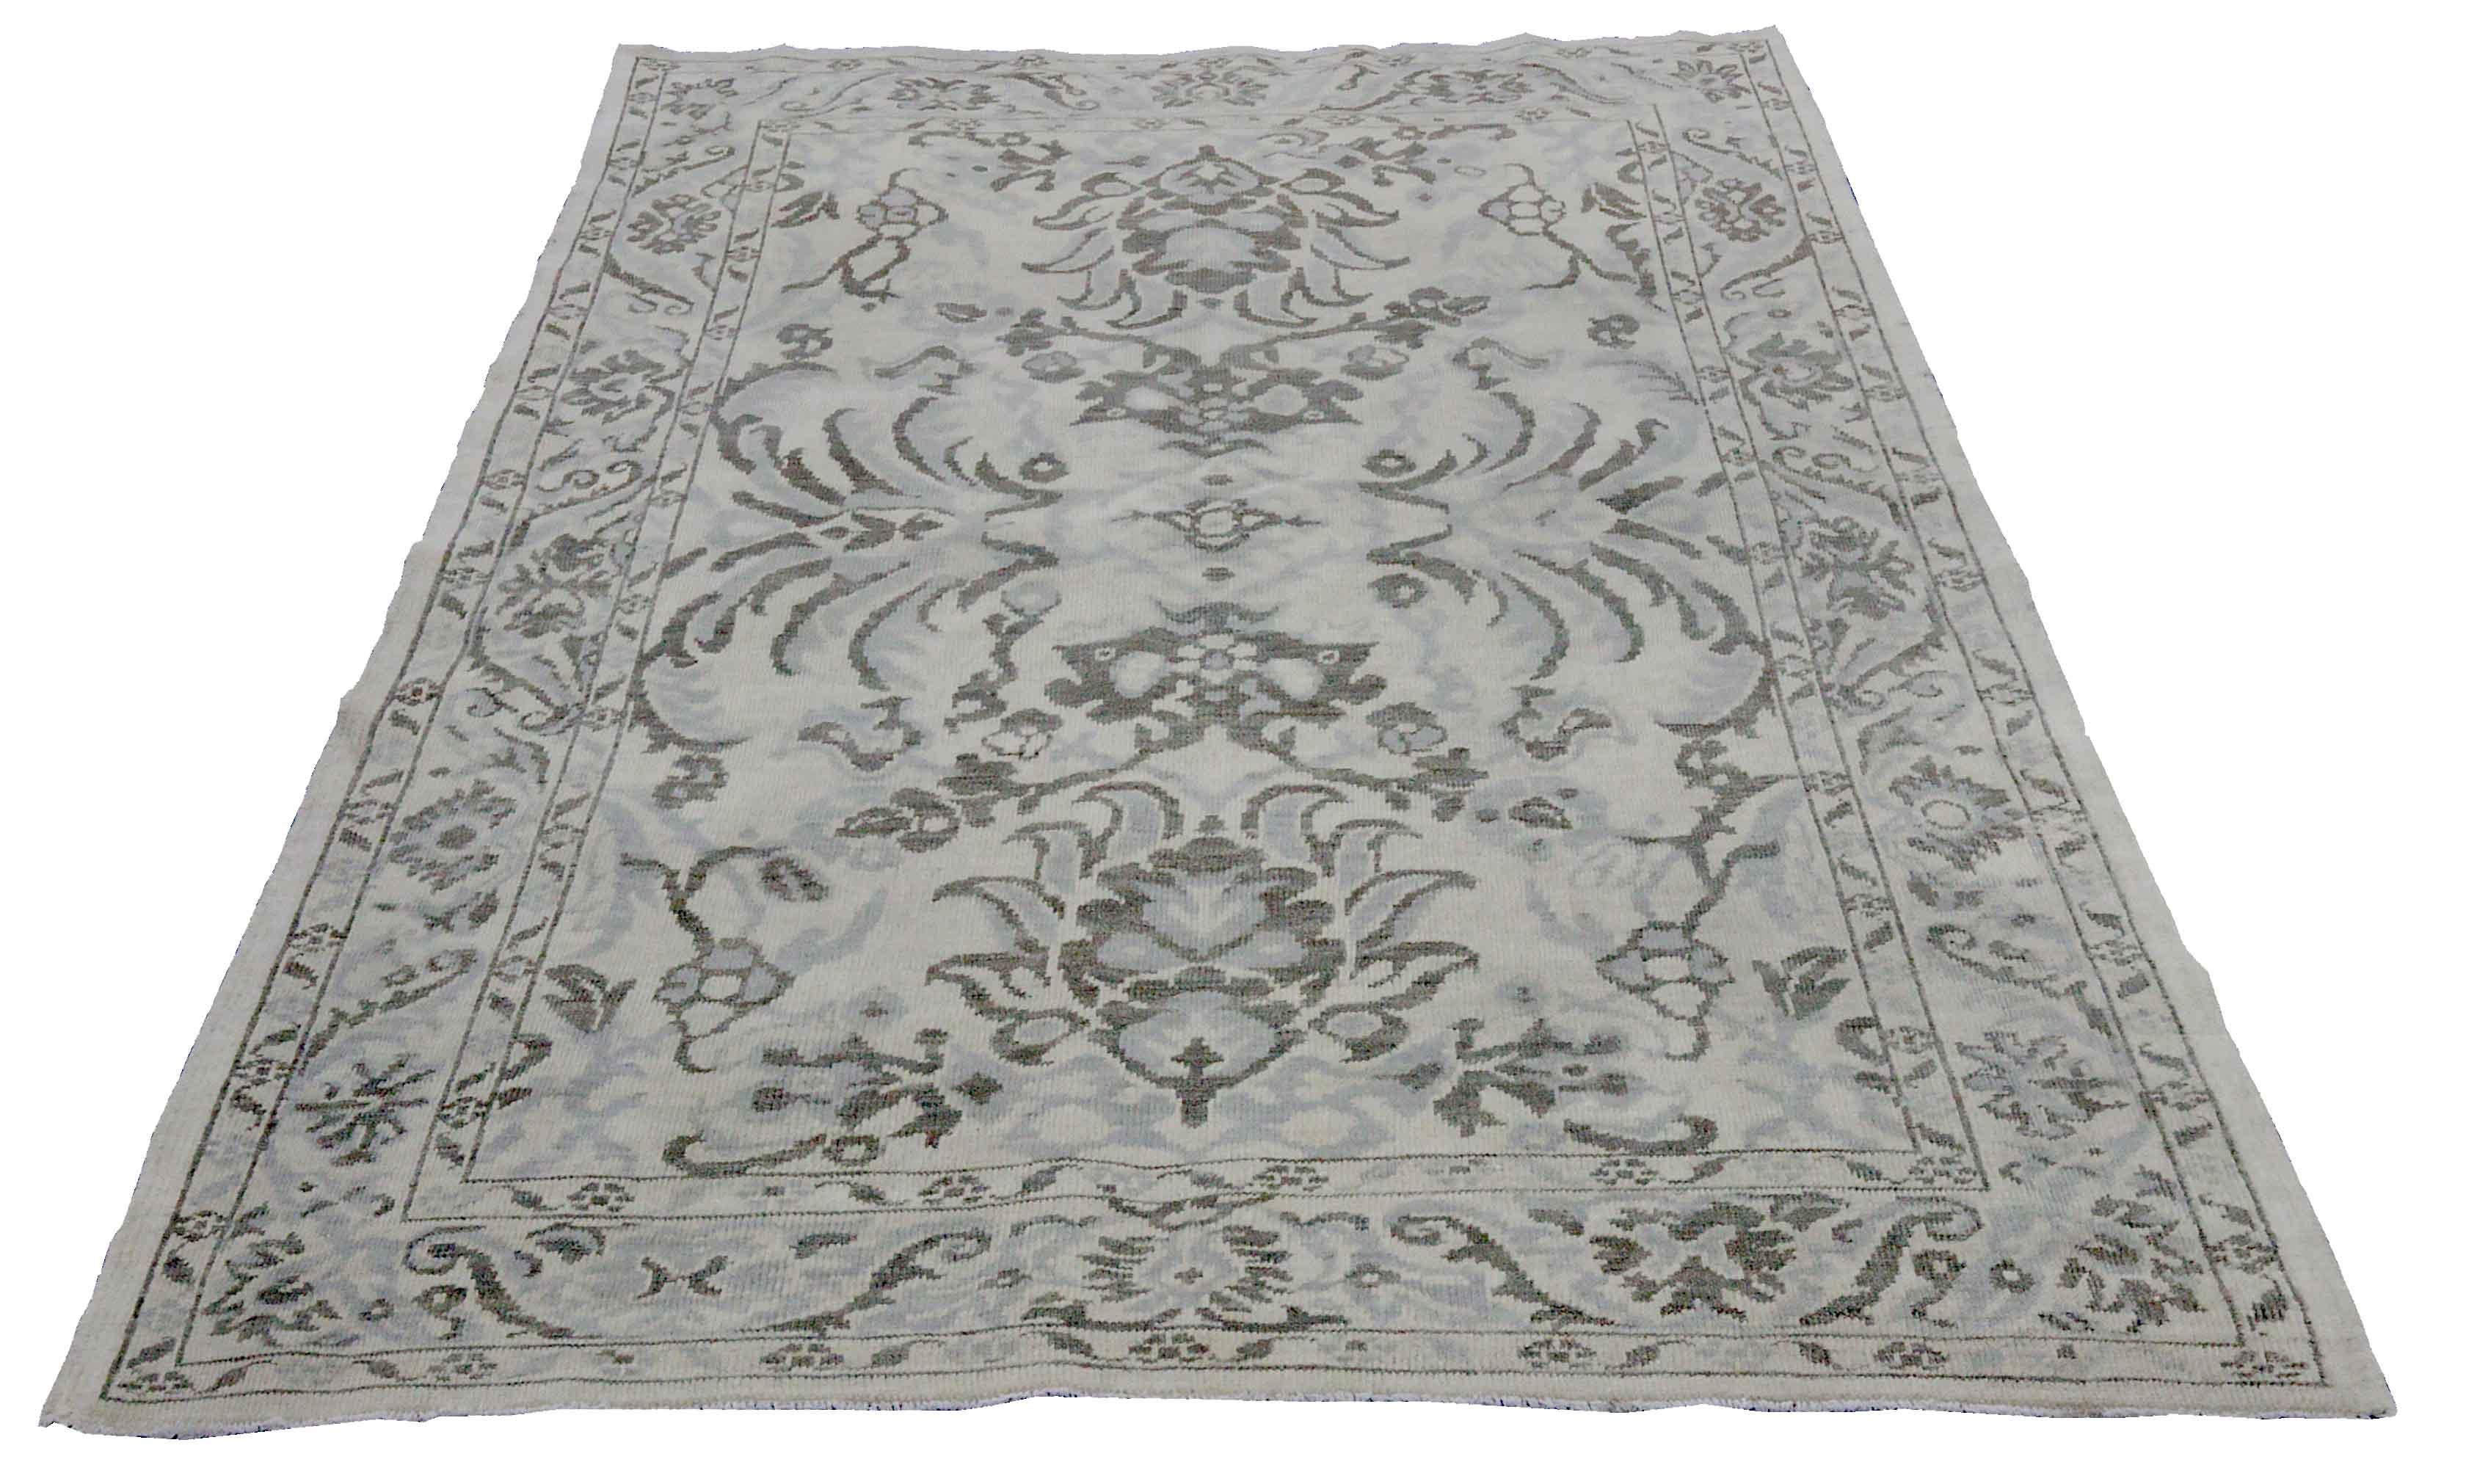 New handmade Turkish area rug from high quality sheep’s wool and colored with eco-friendly vegetable dyes that are proven safe for humans and pets alike. It’s a classic Sultanabad design showcasing a regal ivory field with prominent Herati flower